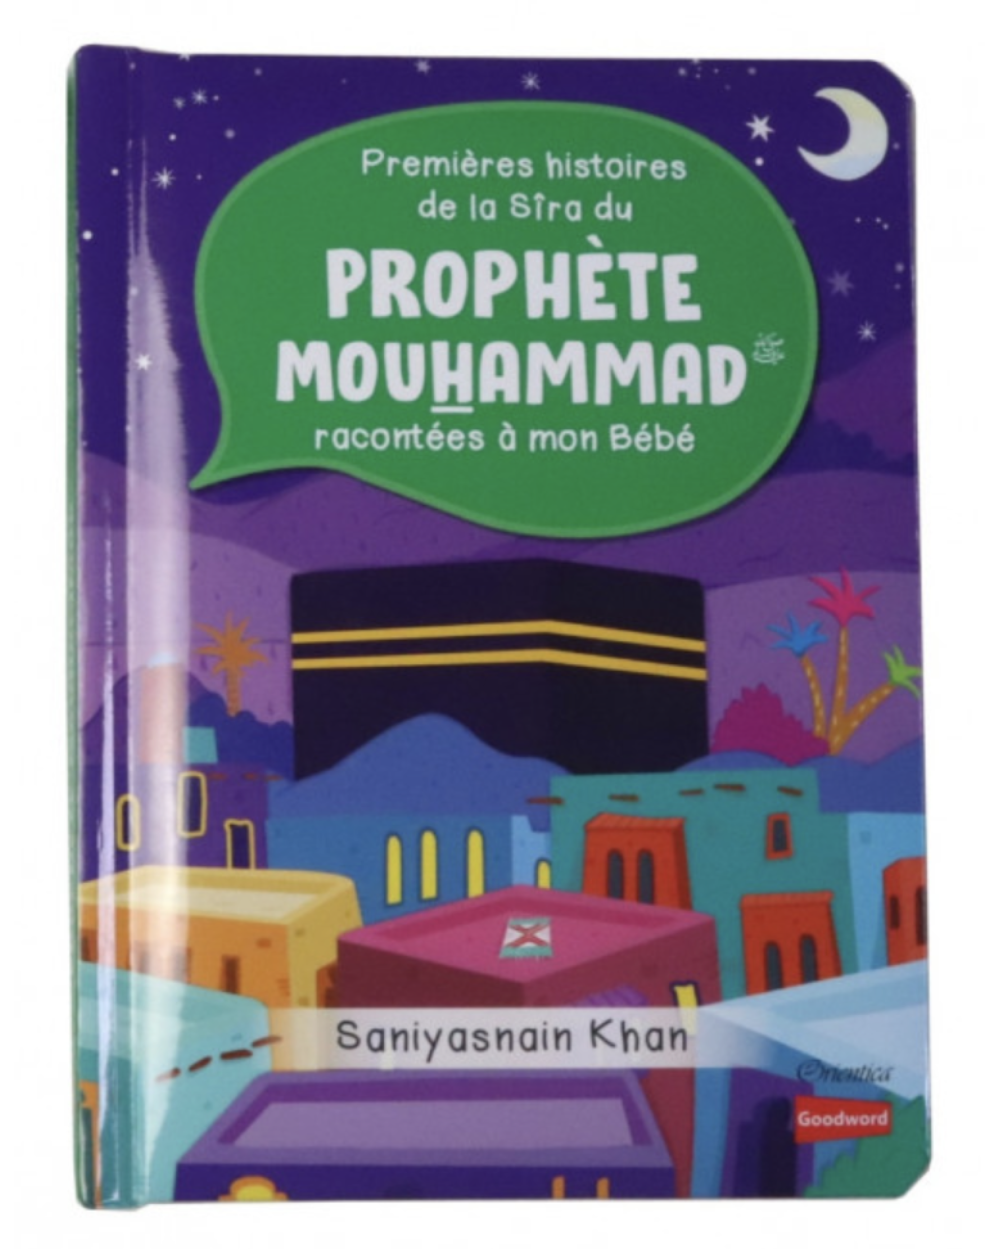 Early Stories from the Sira of Prophet Muhammad